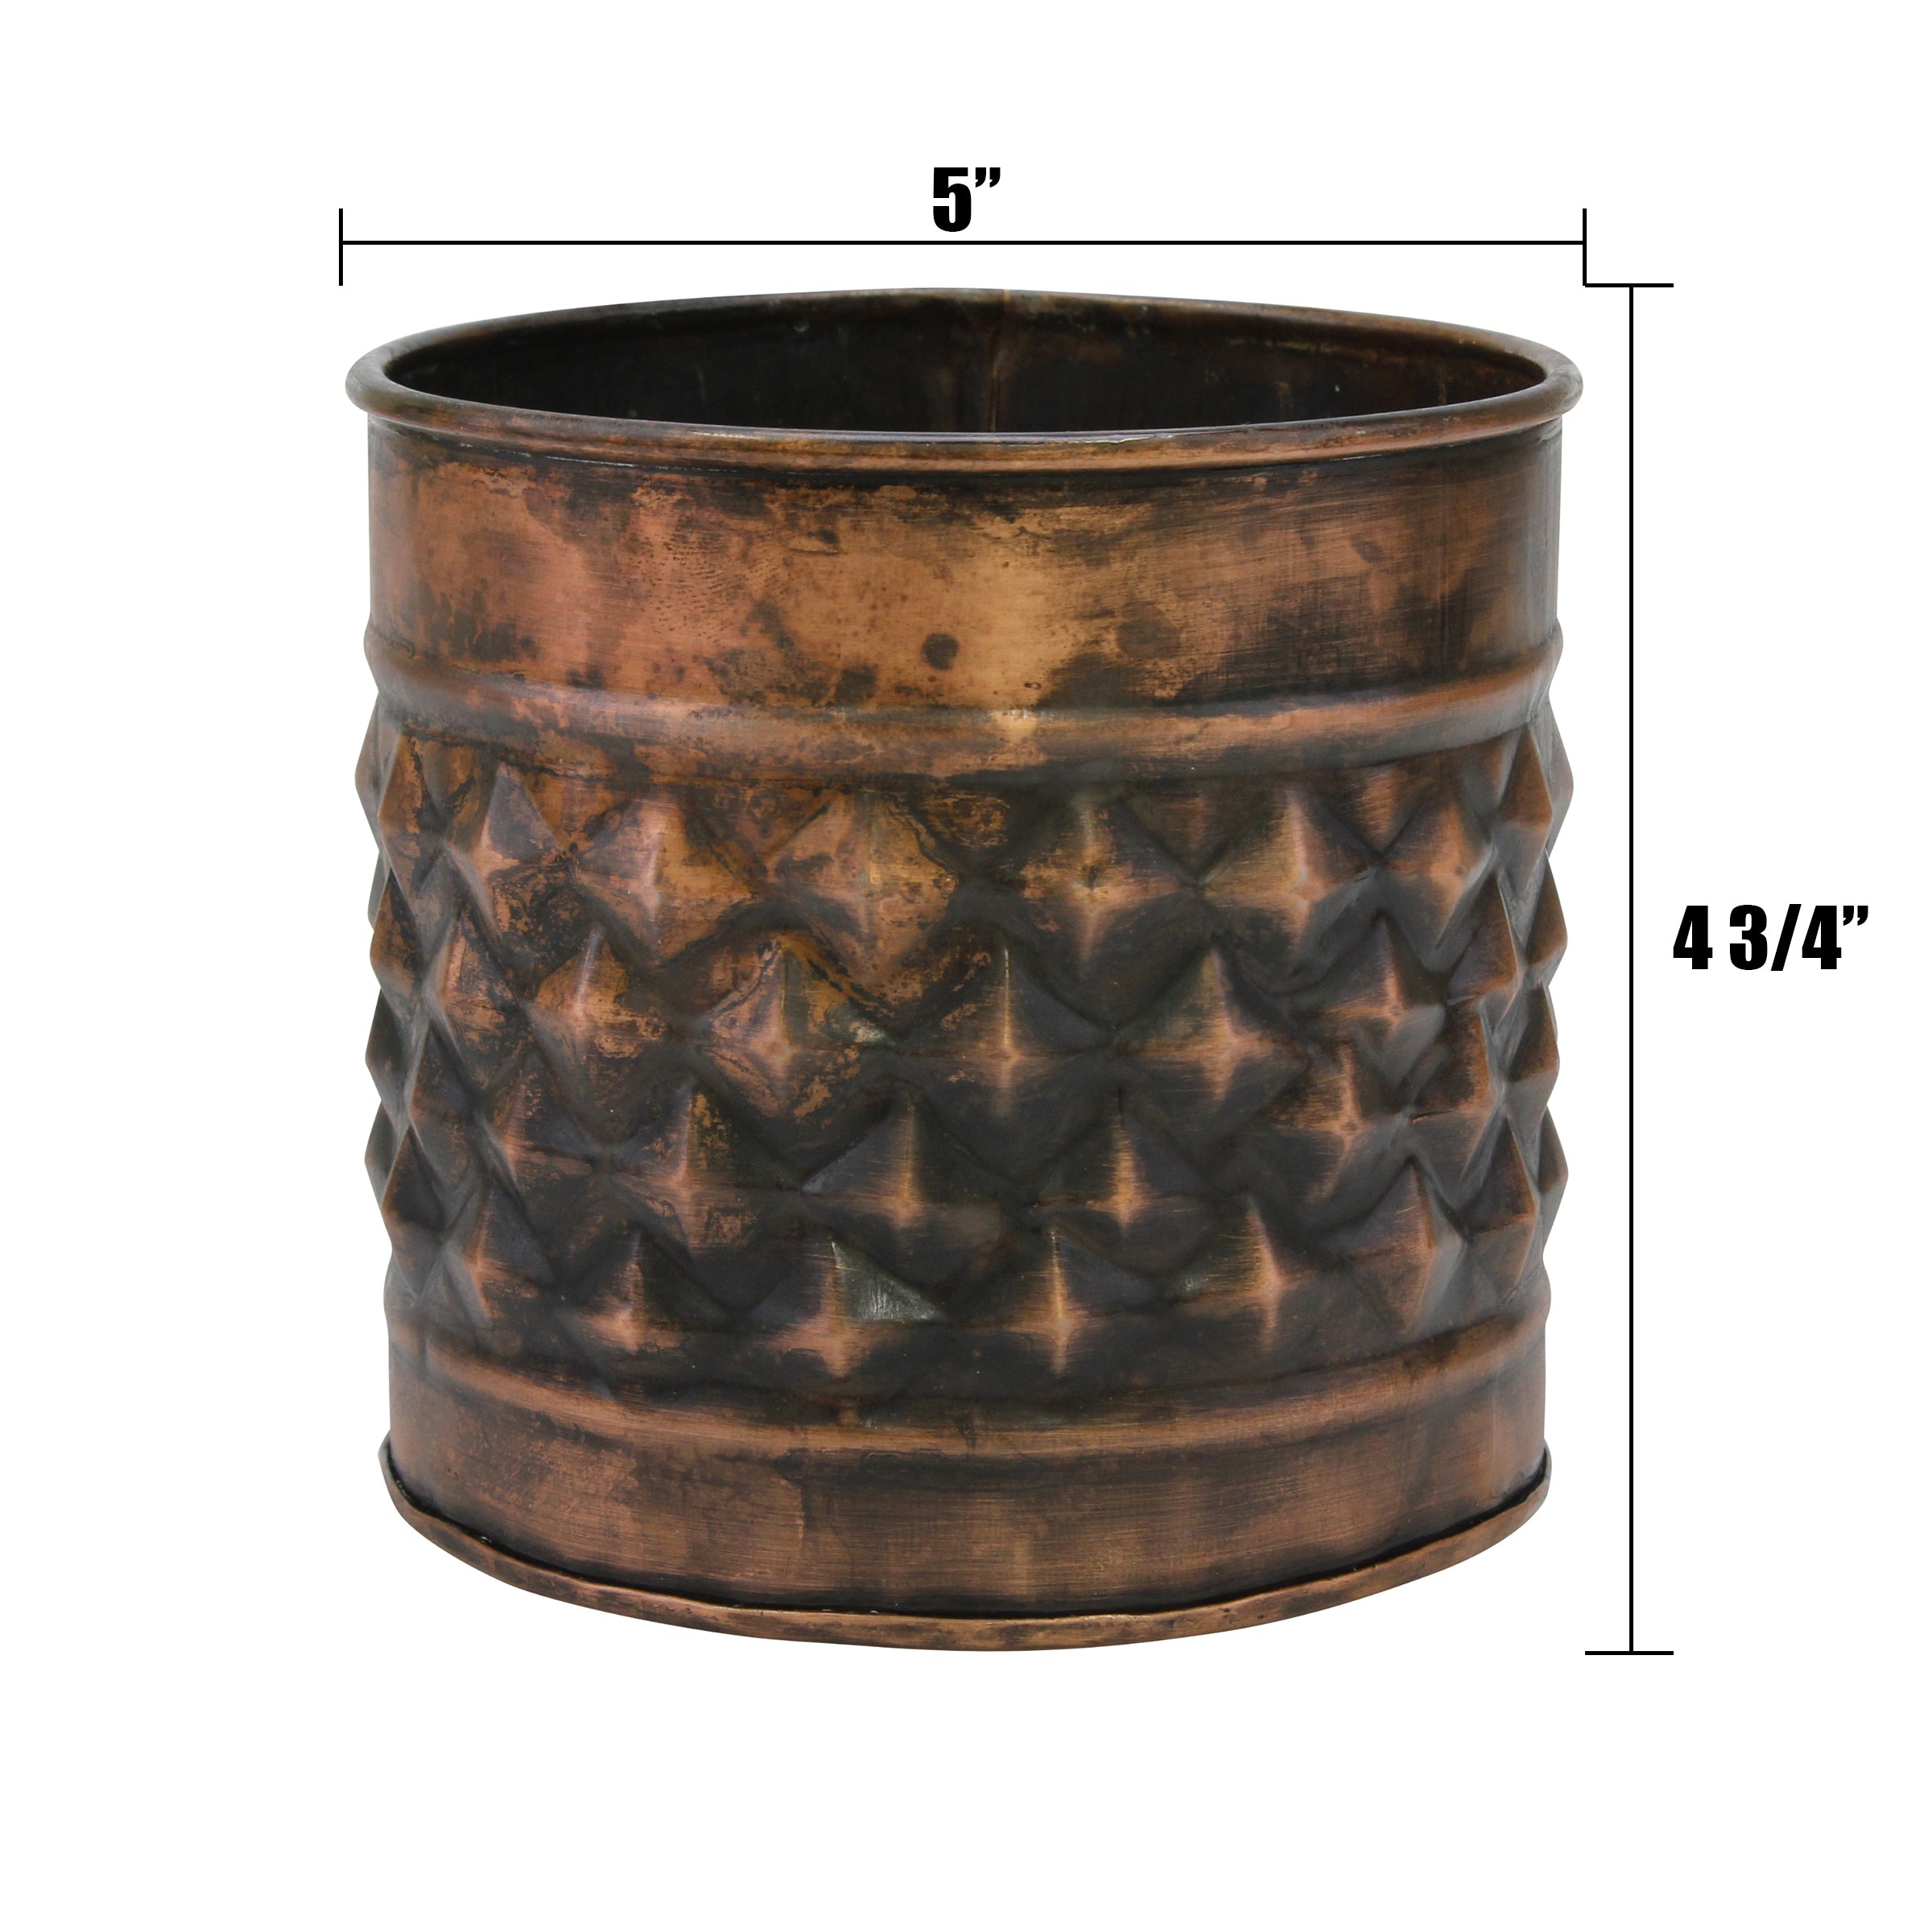 Medium Old Copper Texturized Metal Planter | Stonebriar Collection